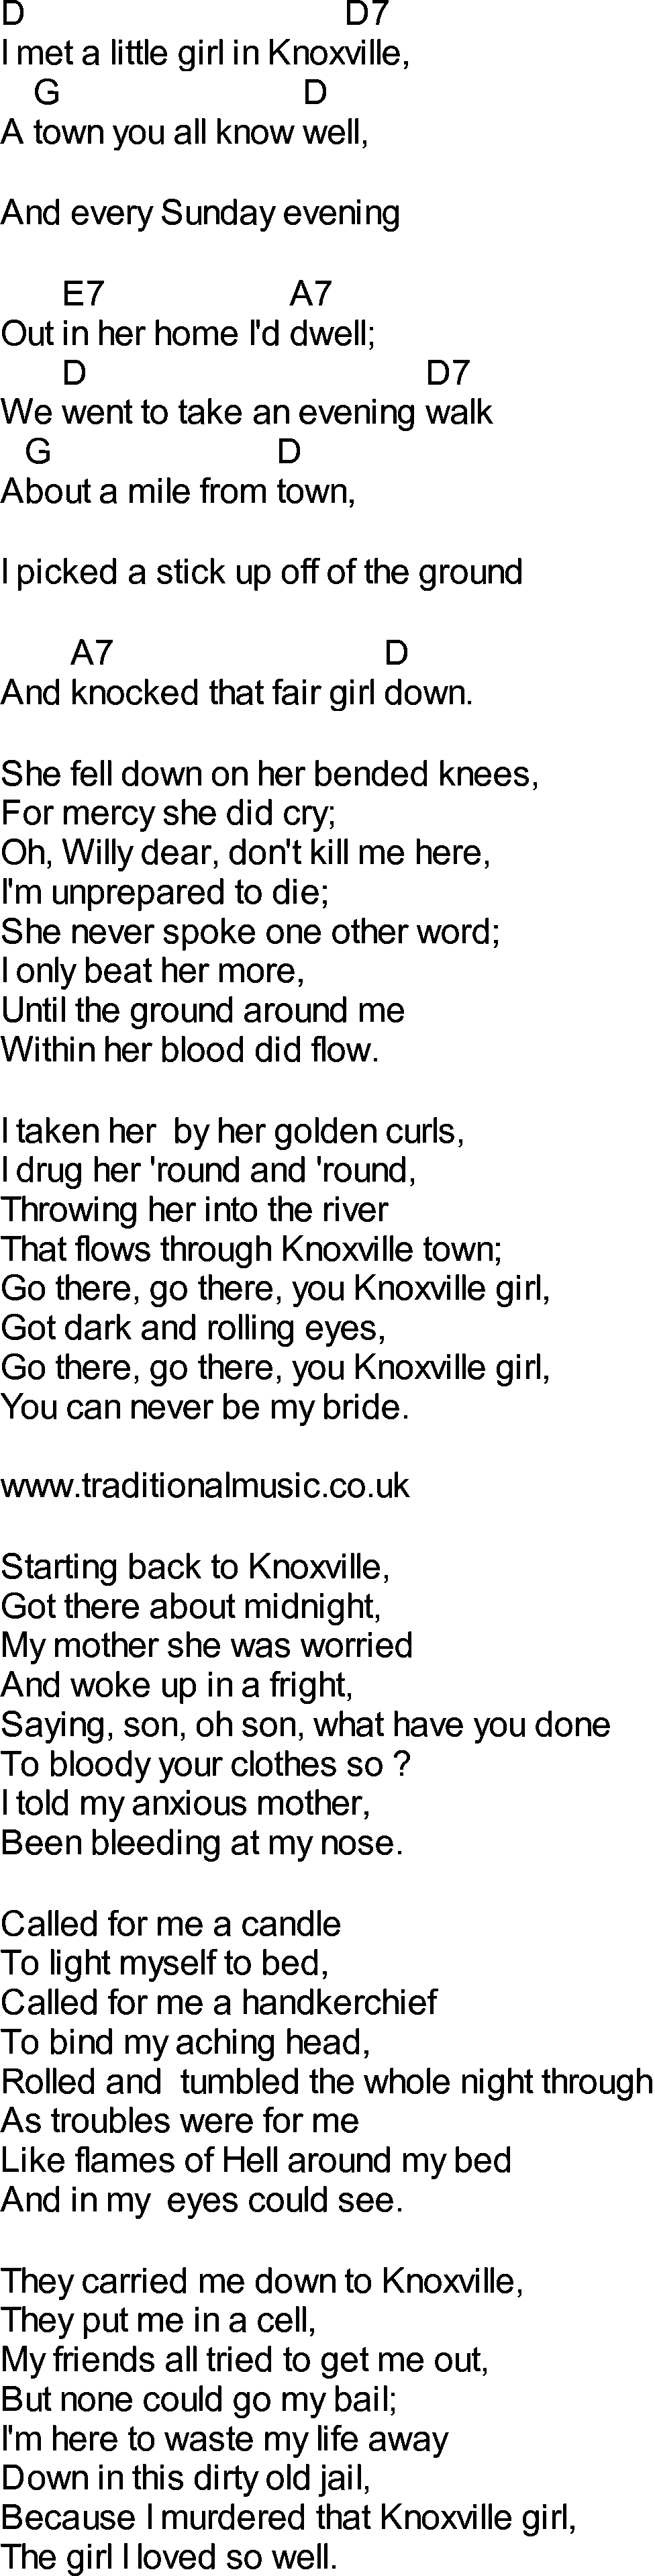 Bluegrass songs with chords - Knoxville Girl